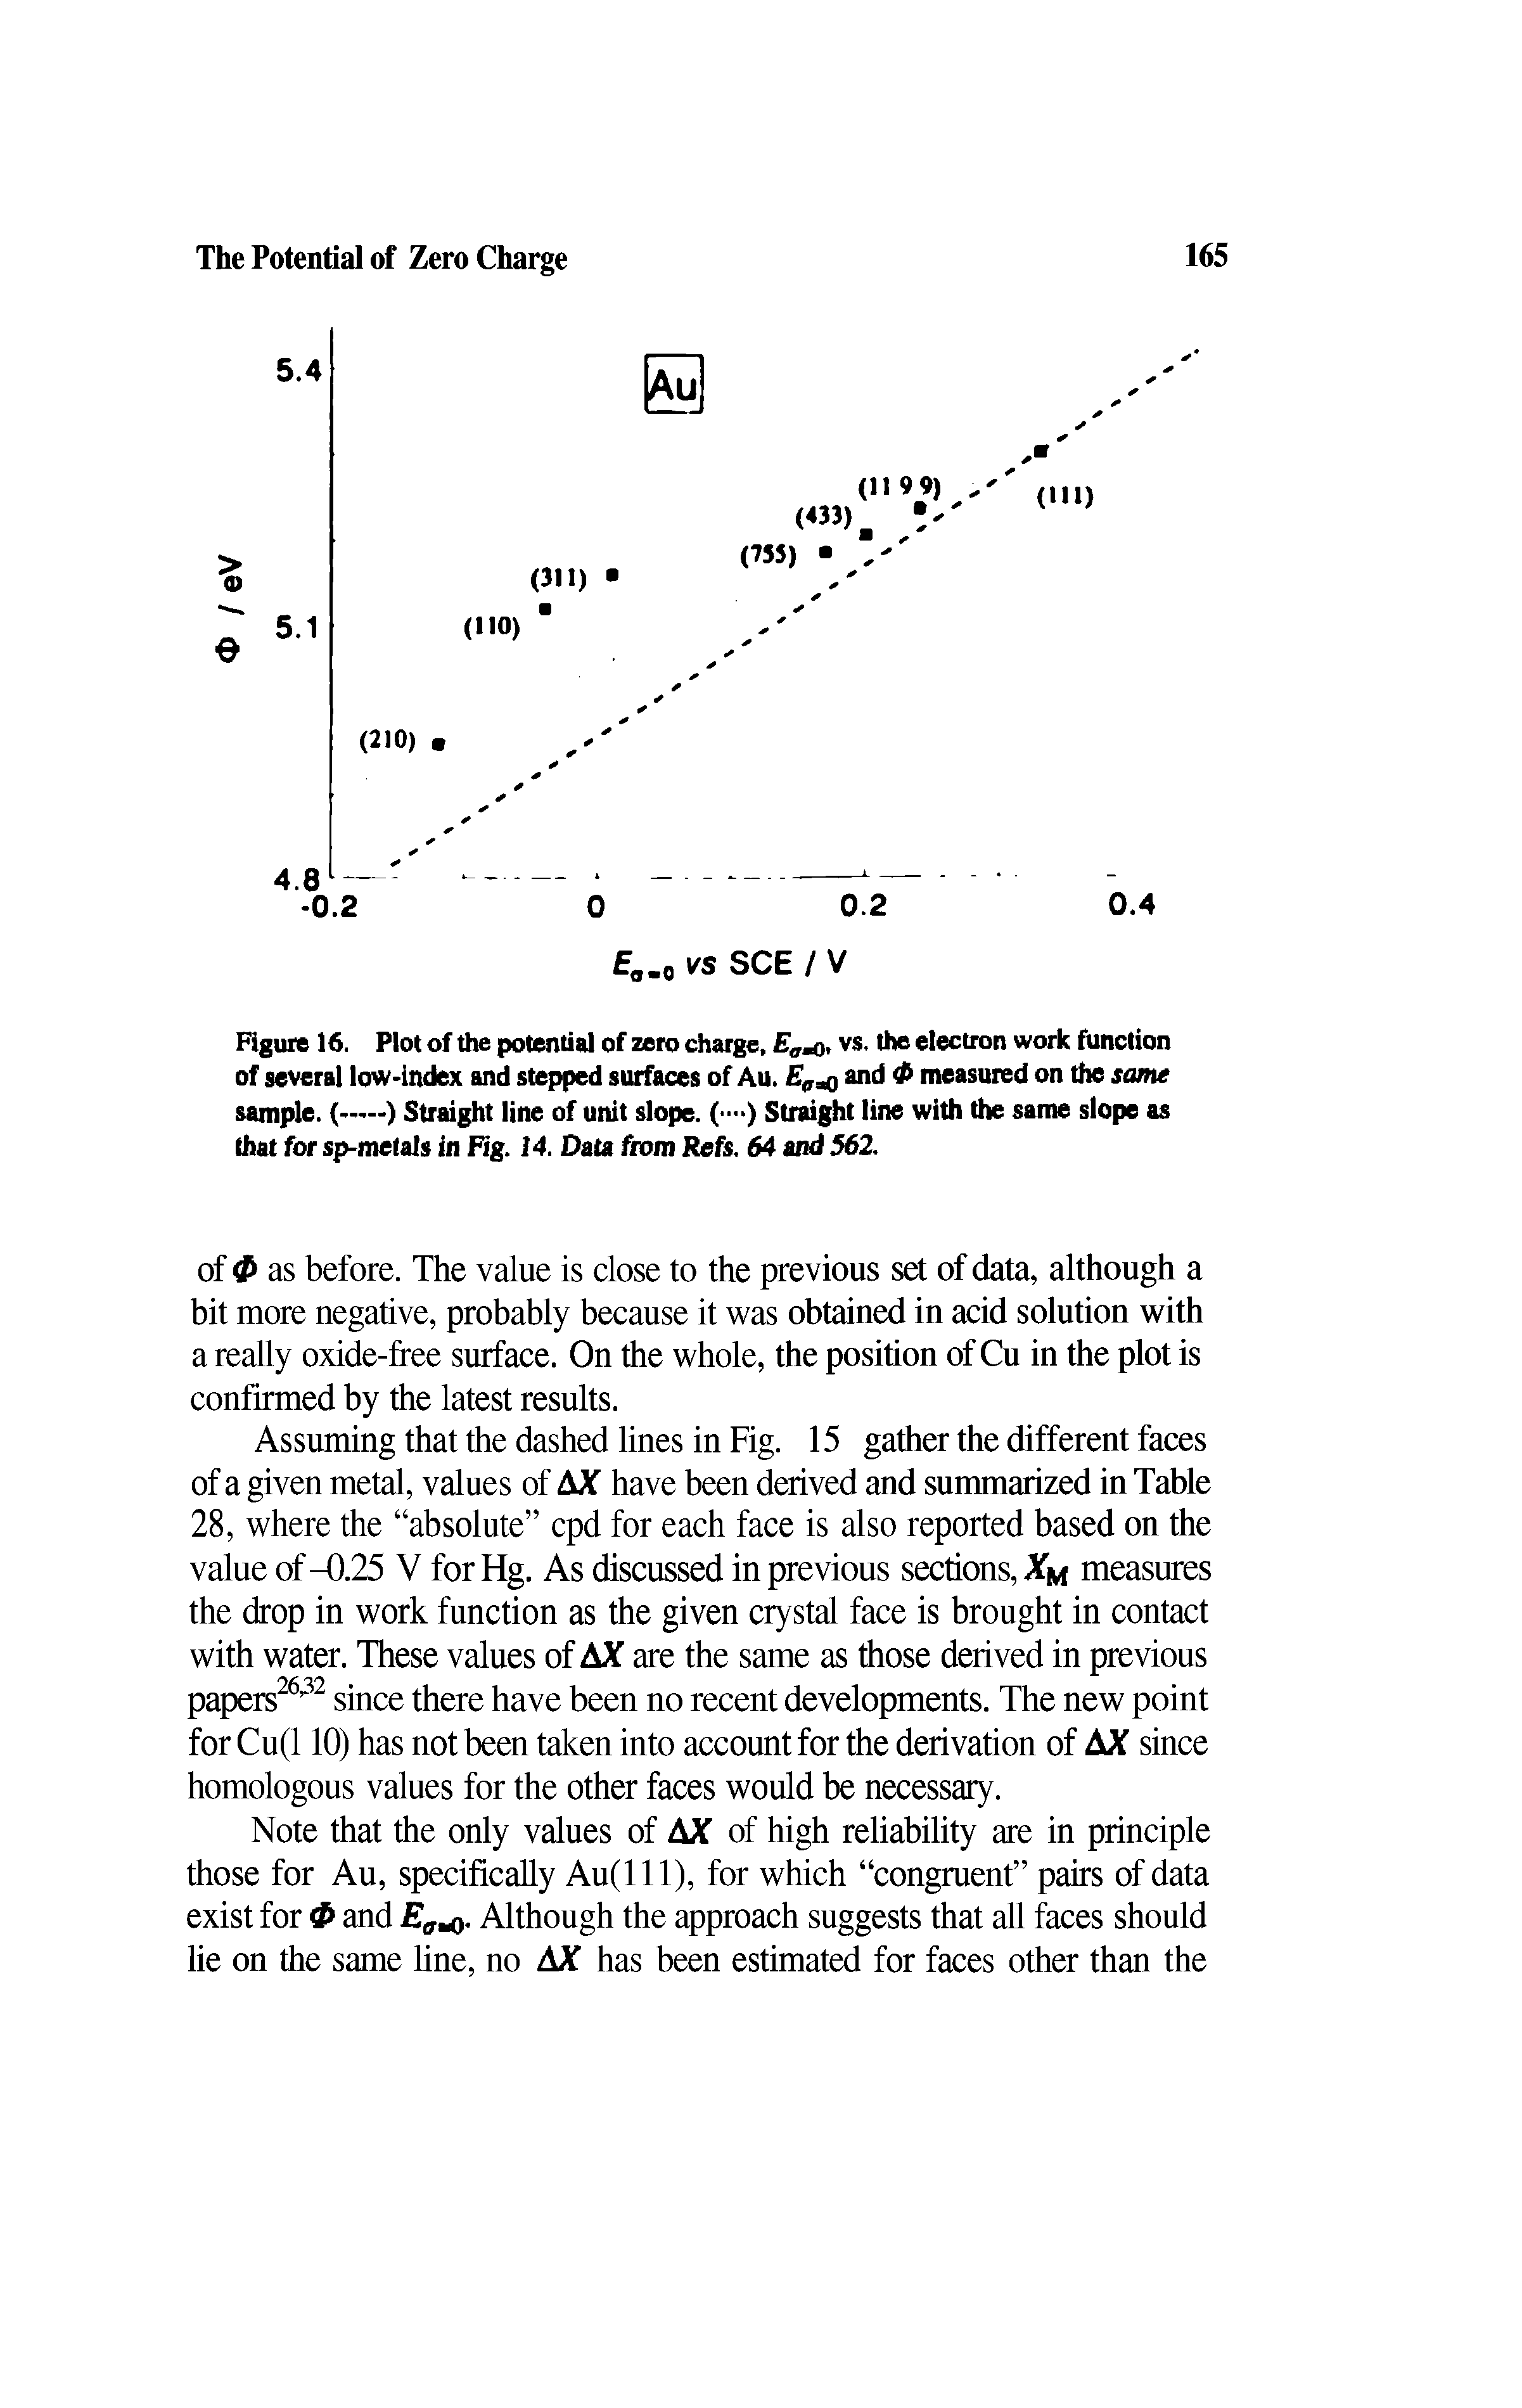 Figure 16. Plot of the potential of zero charge, Eamo, vs. the electron work function of several low-index and stepped surfaces of Au. E a0 and measured on the same...